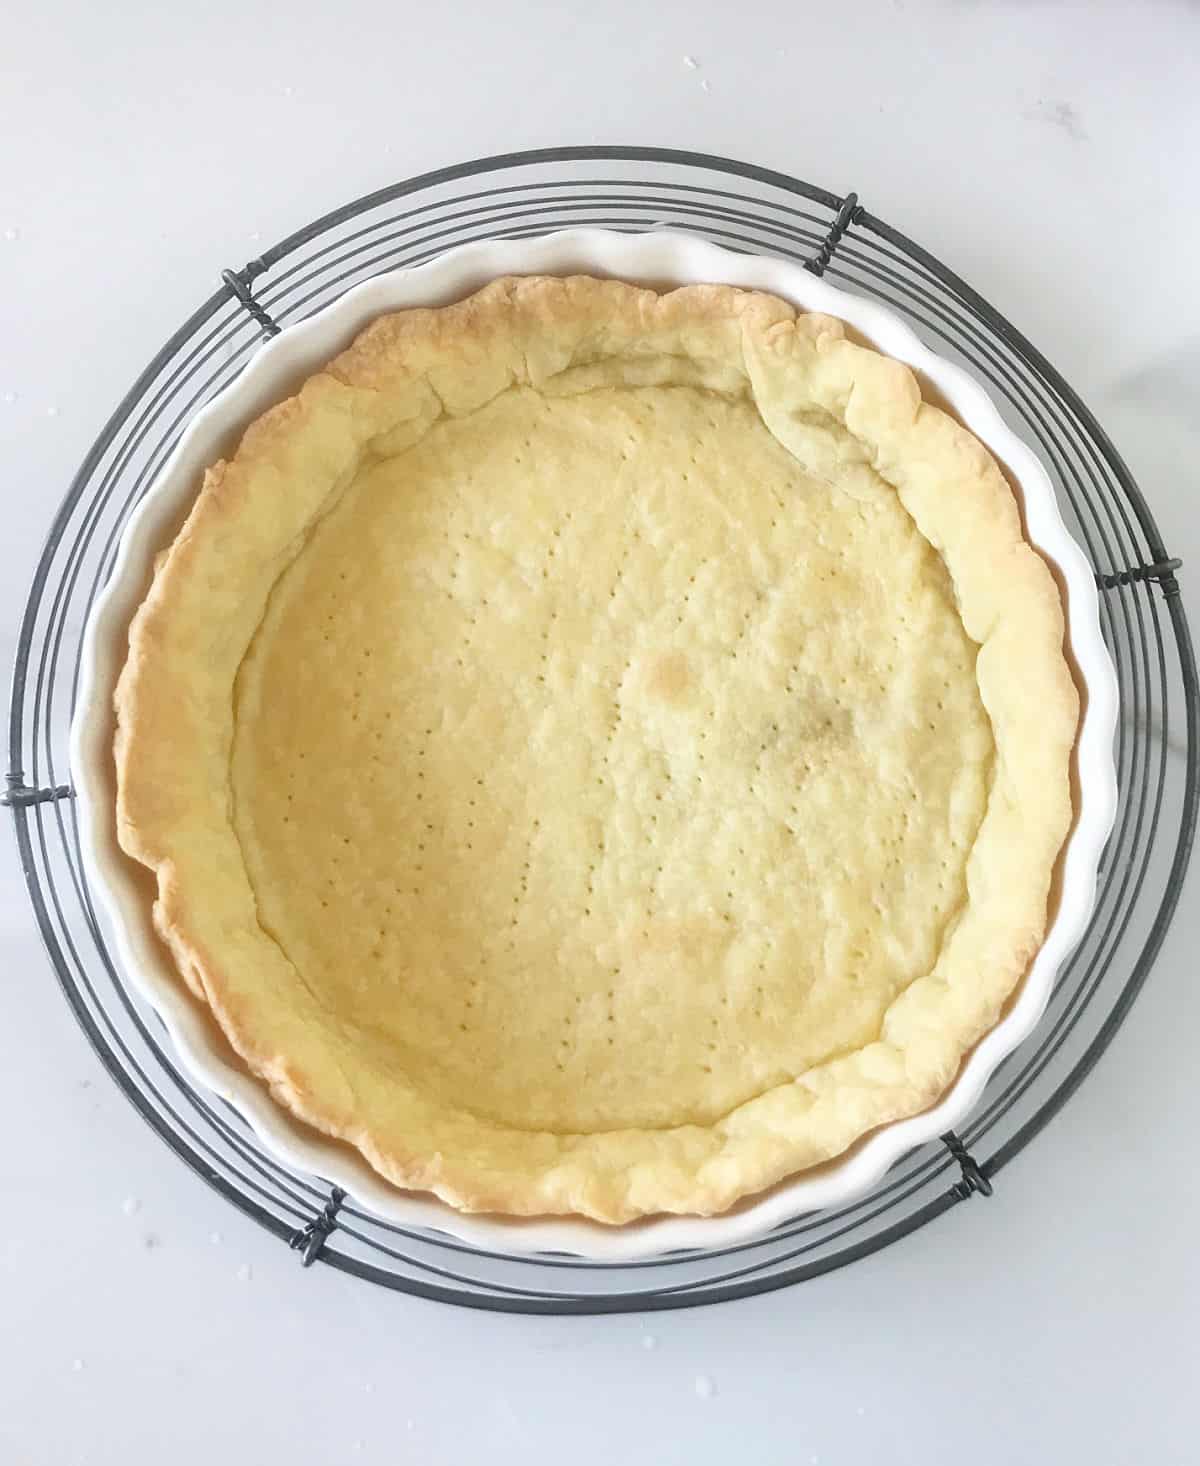 Baked pie crust on wire rack on white surface